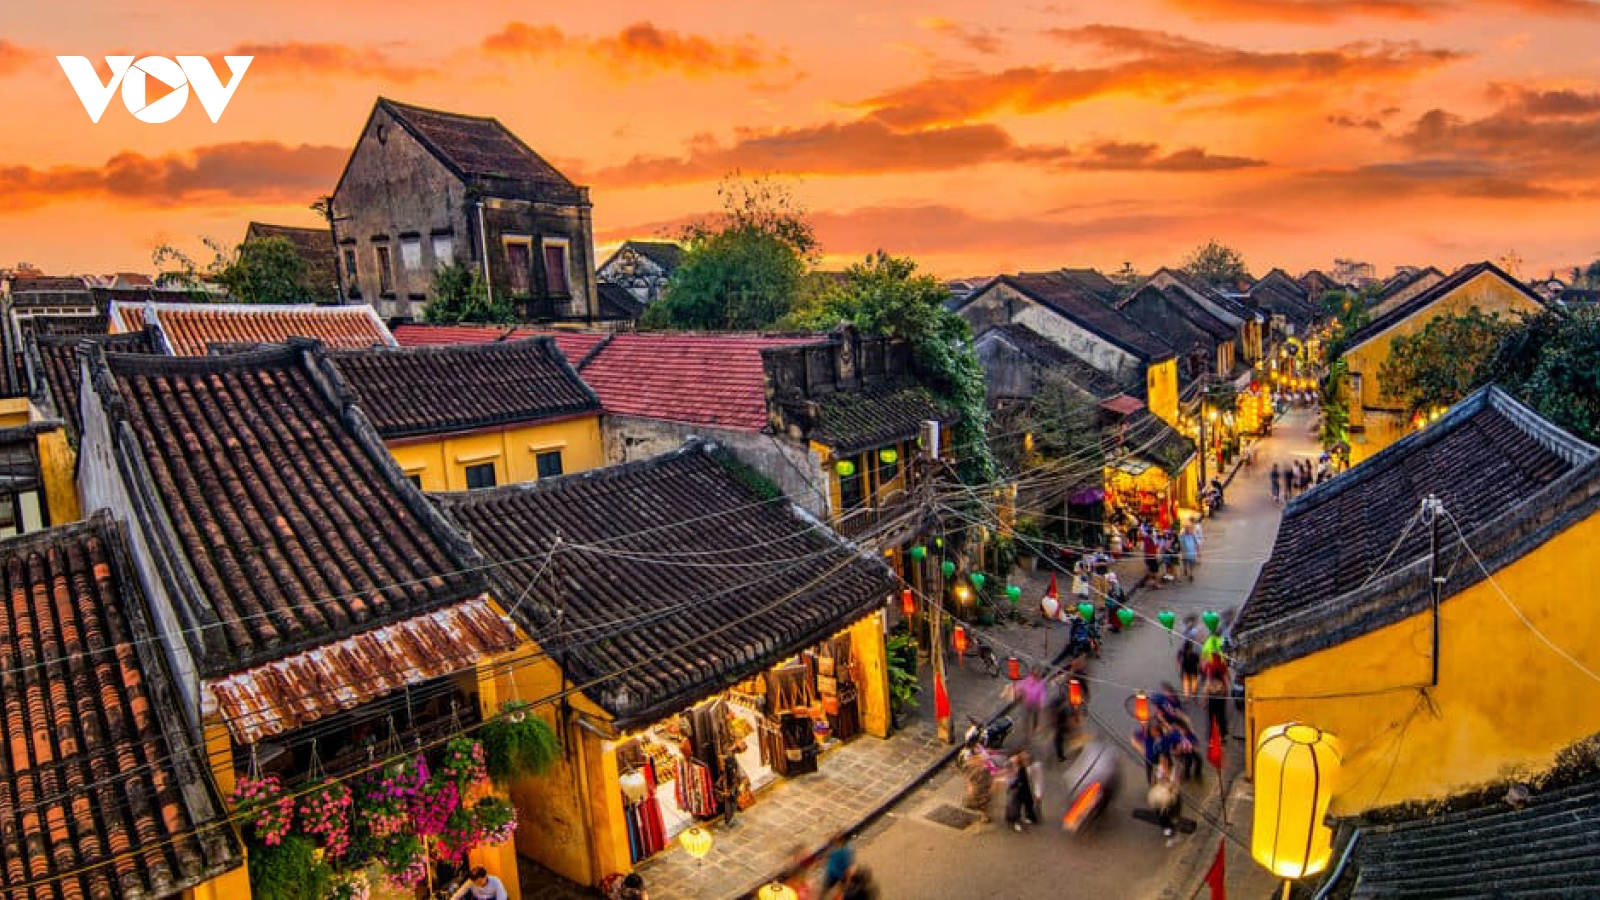 Vietnam named among world’s 20 best places to visit in January